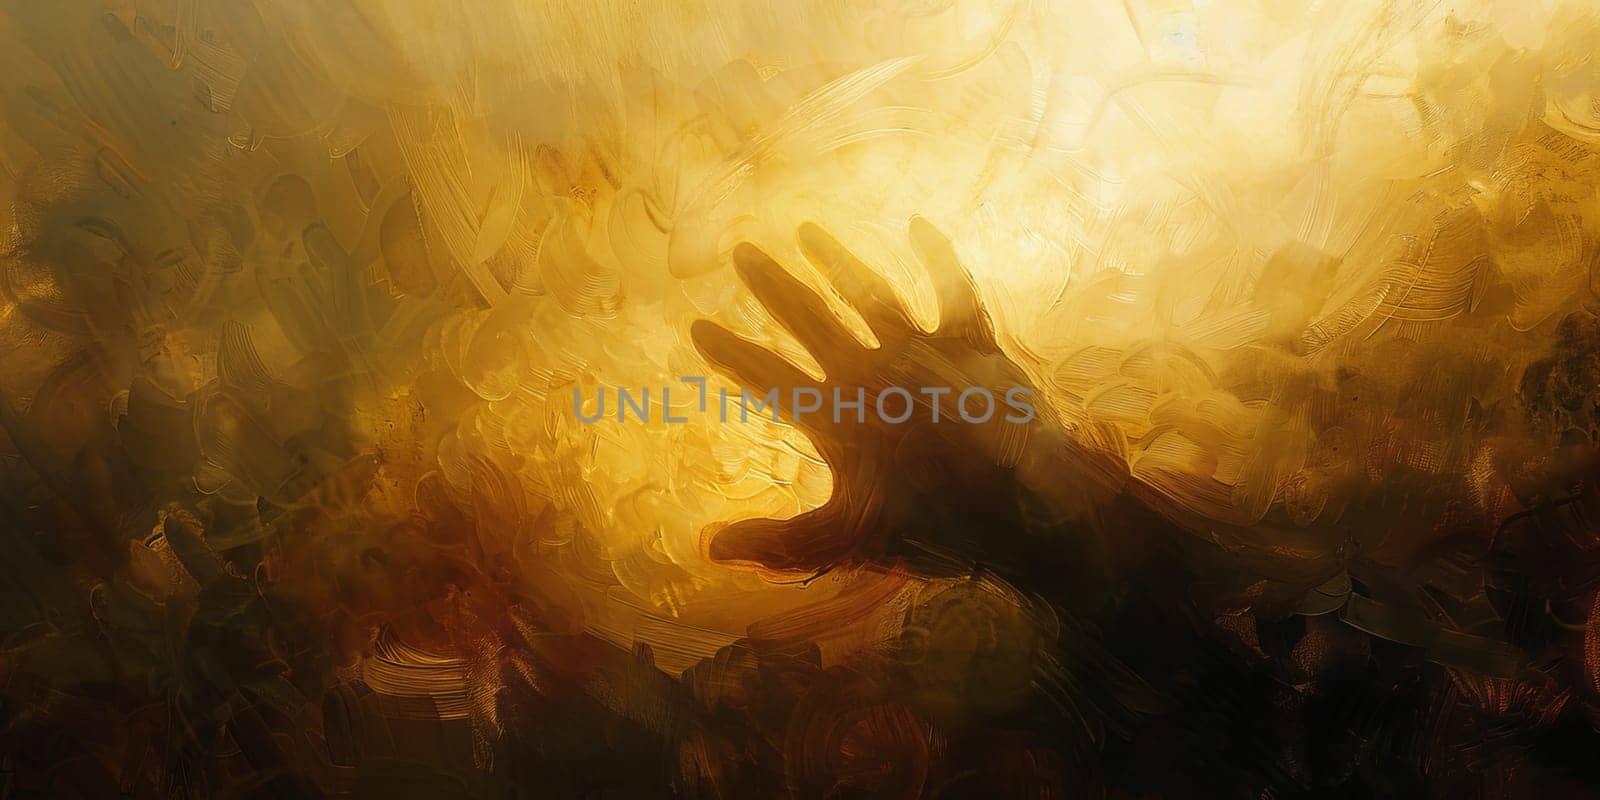 Painting of a persons hands reaching upwards against the sky by Kadula